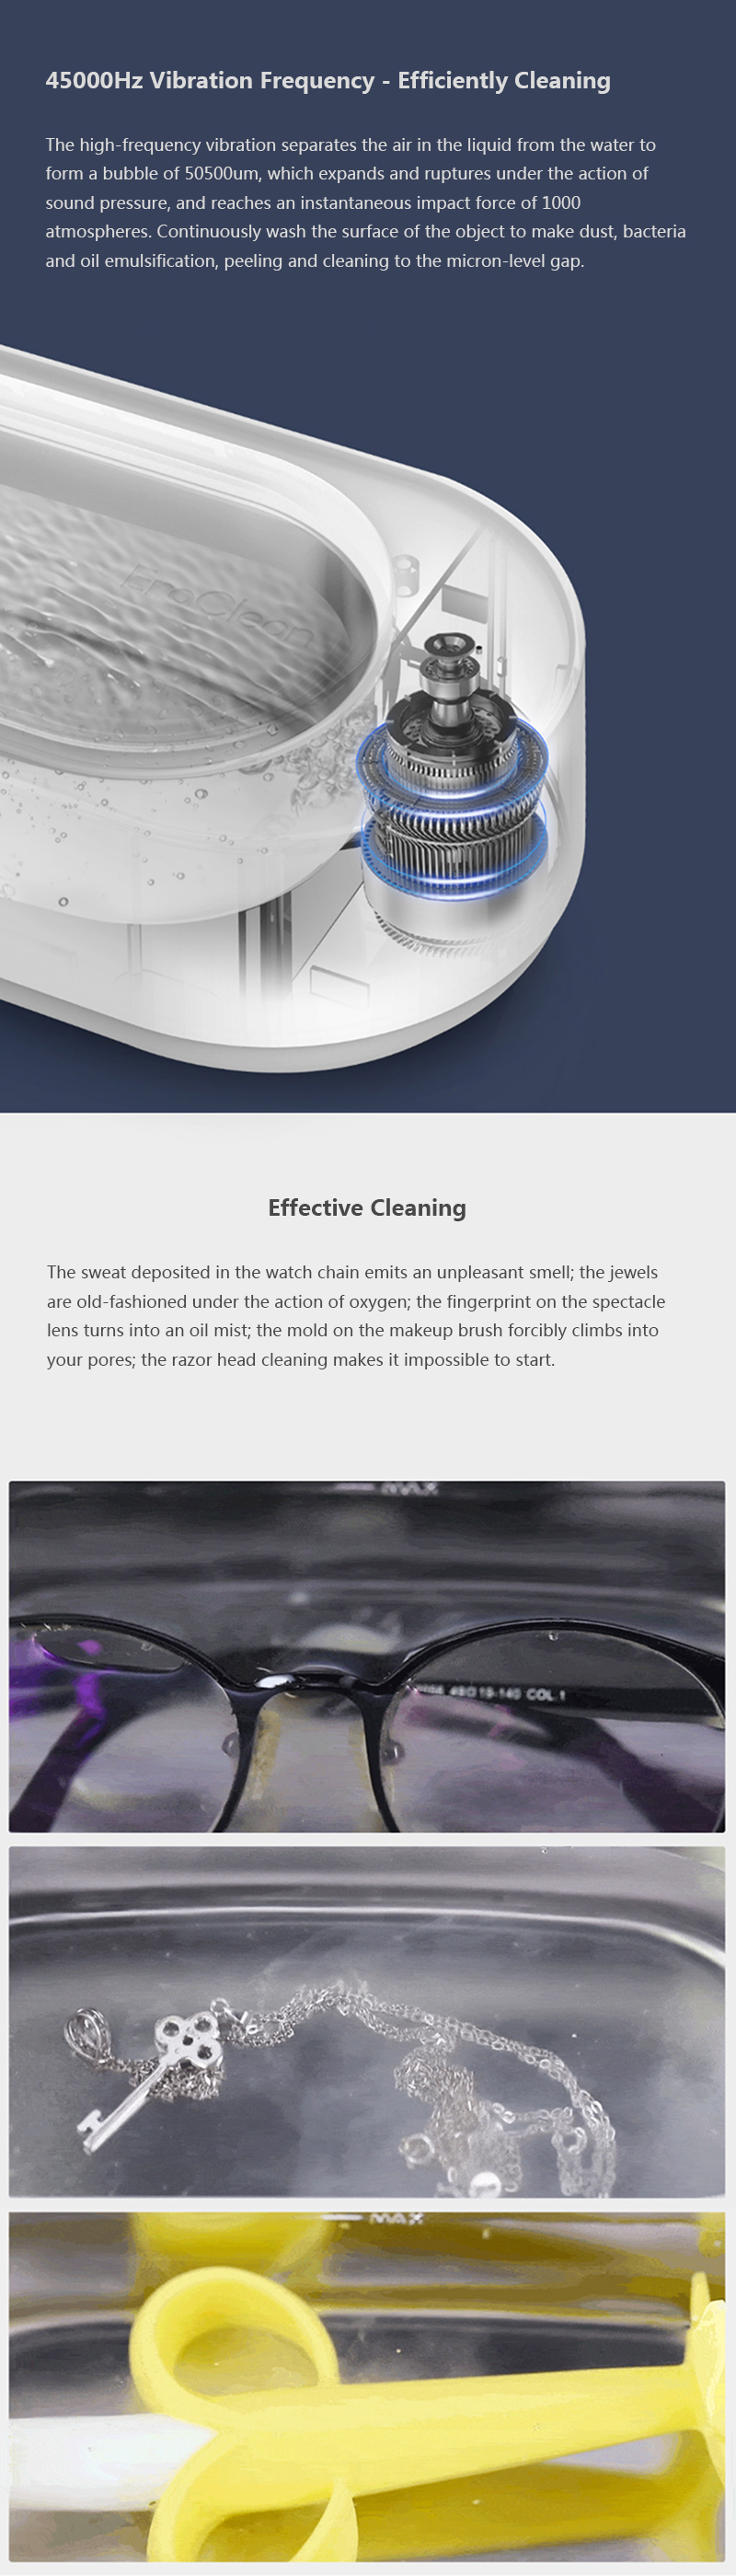 EraClean-Smart-Control-Ultrasonic-Cleaner-45000Hz-High-Frequency-Vibration-Jewelry-Eyeglasses-Cleane-1575929-3